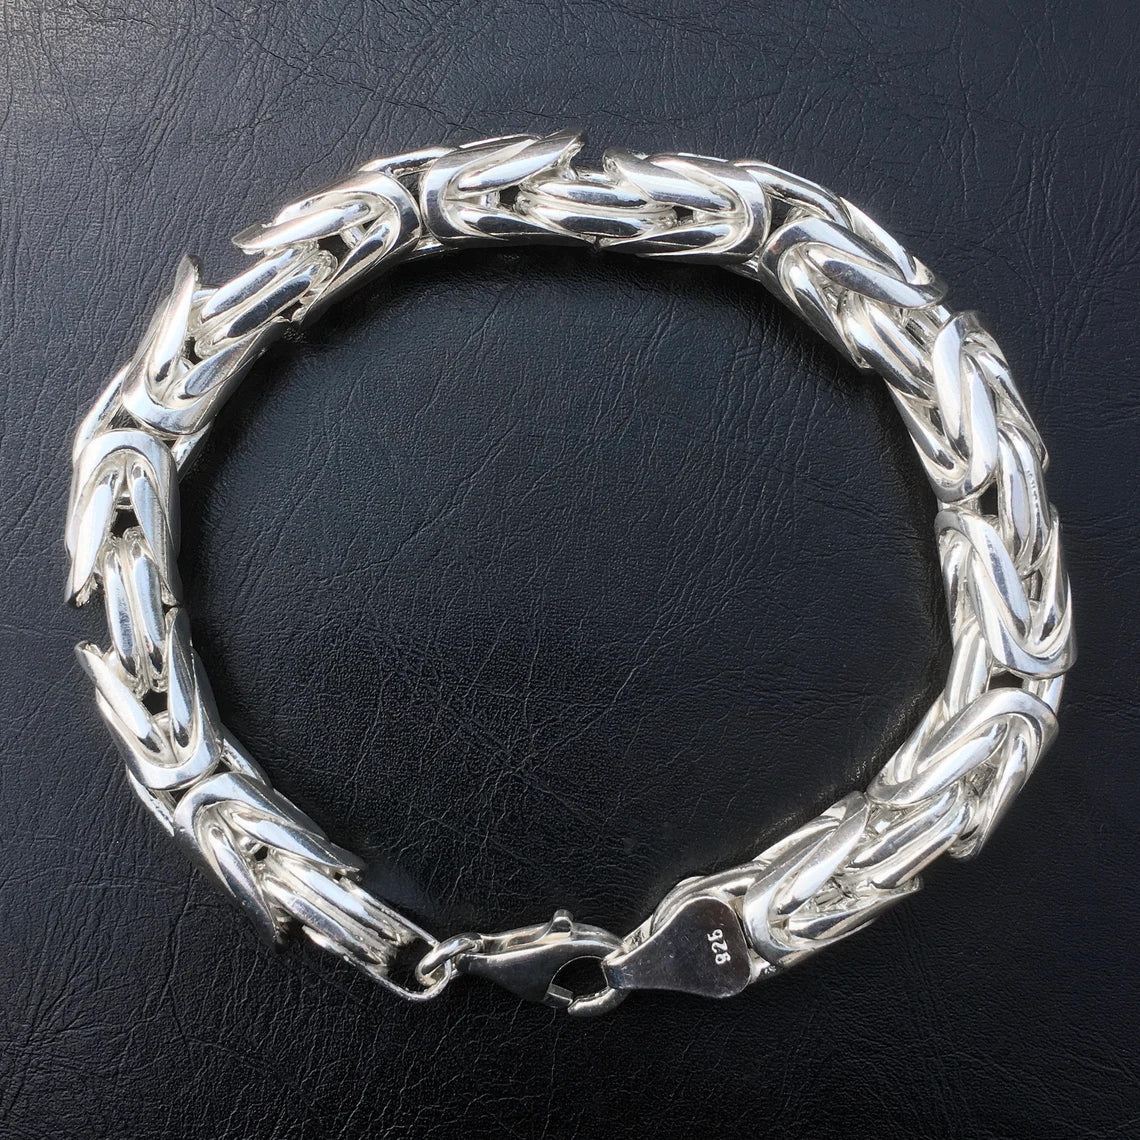 Silver chain bracelet,thick silver chain bracelet,eye bracelet,link chain  bracelet,silver eye chain bracelet,men's bracelet